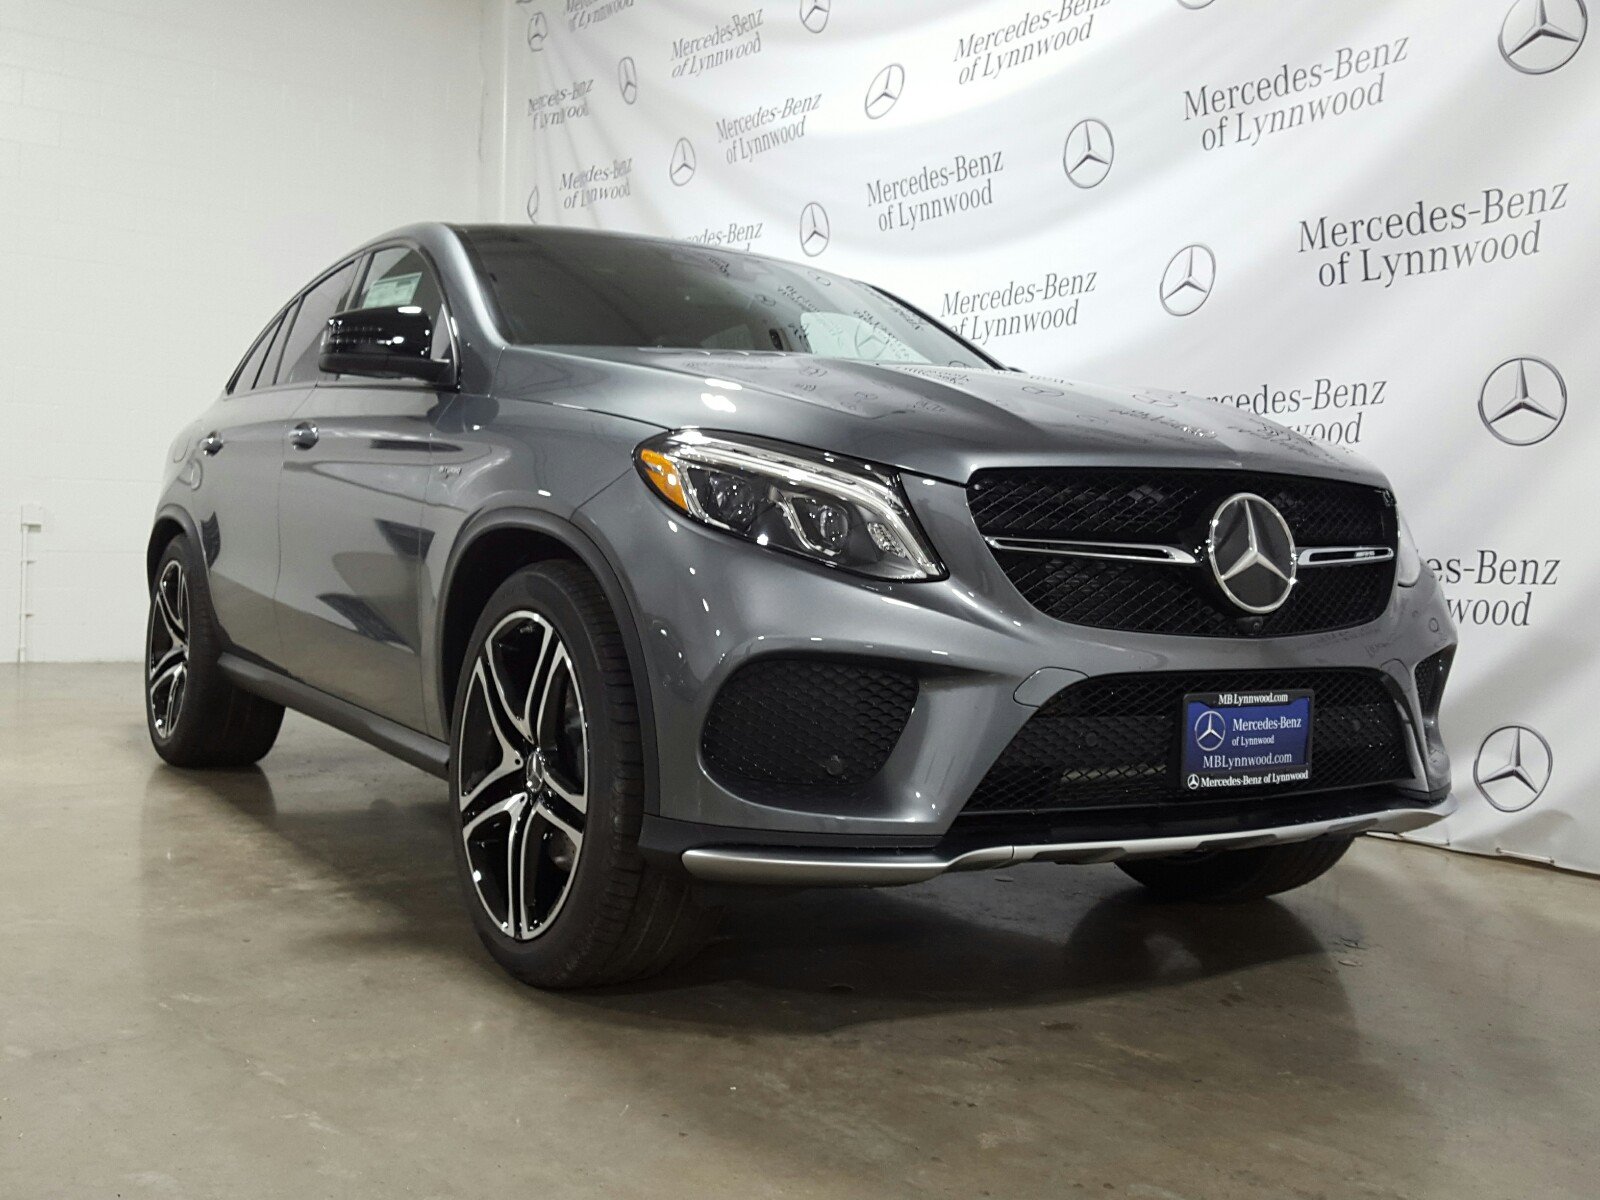 New 2019 Mercedes-Benz GLE AMG® GLE 43 4MATIC® Coupe Coupe in Lynnwood #290187 | Mercedes-Benz ...